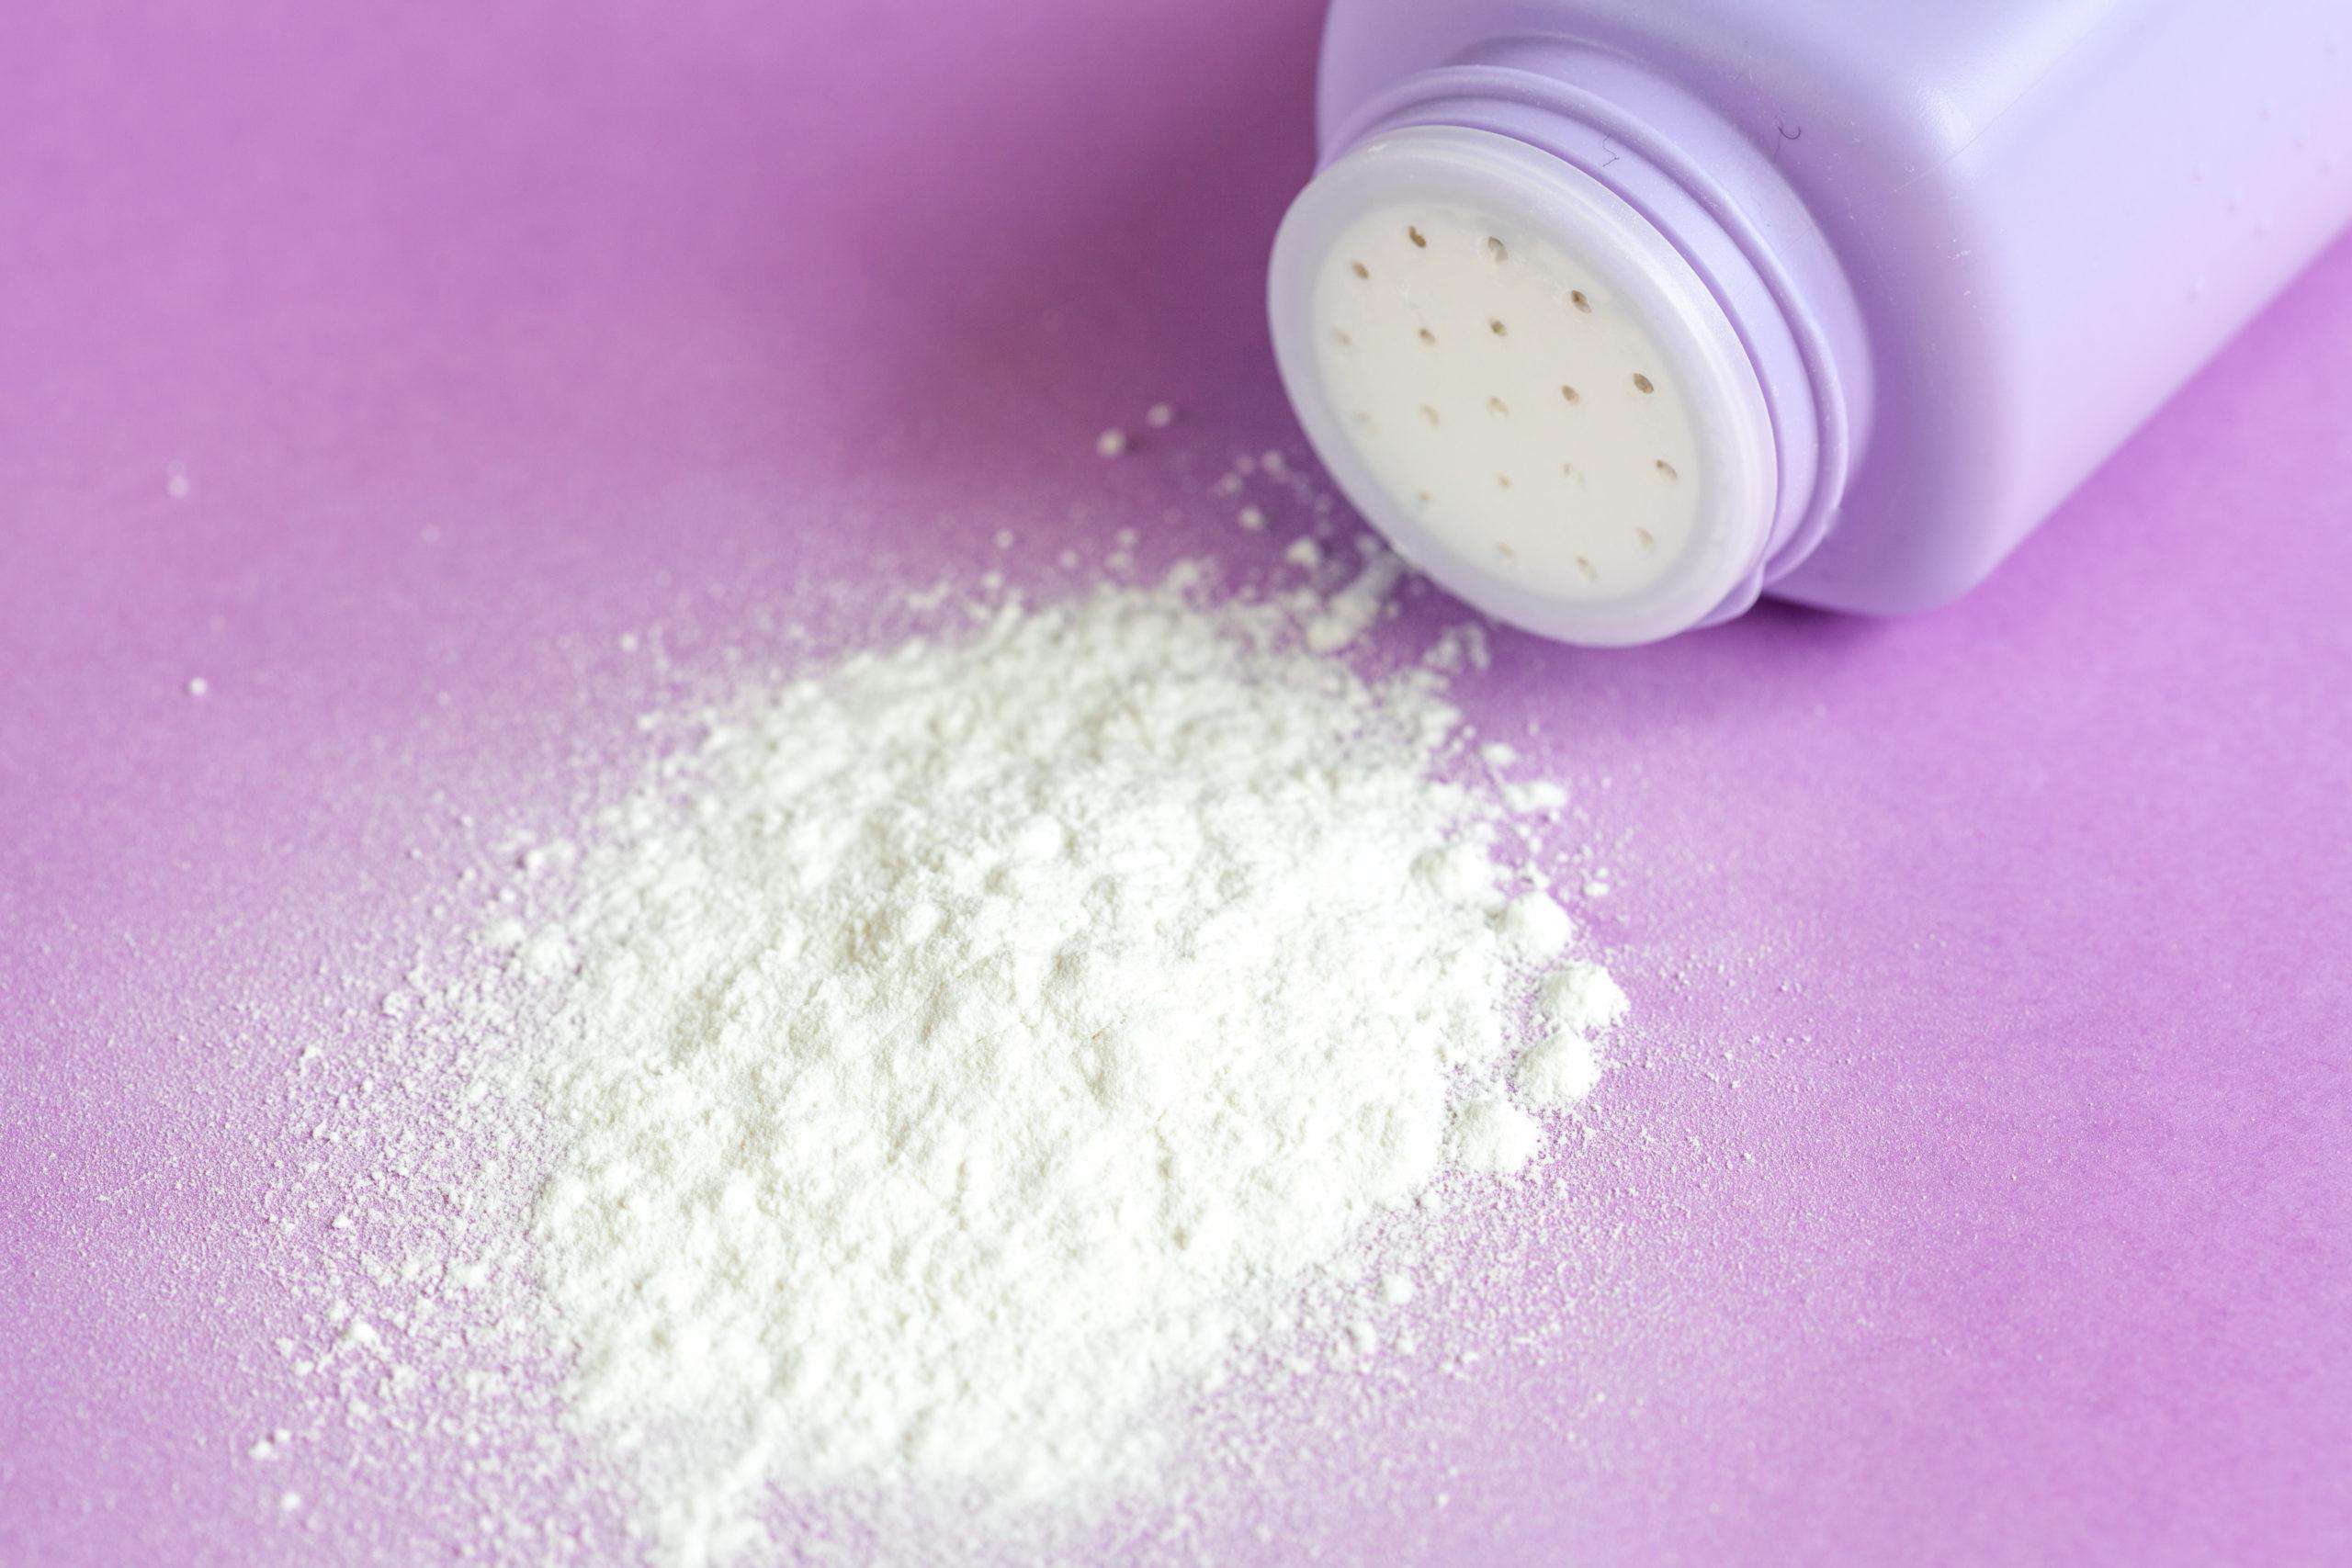 Can you sue for ovarian cancer caused by talcum powder?